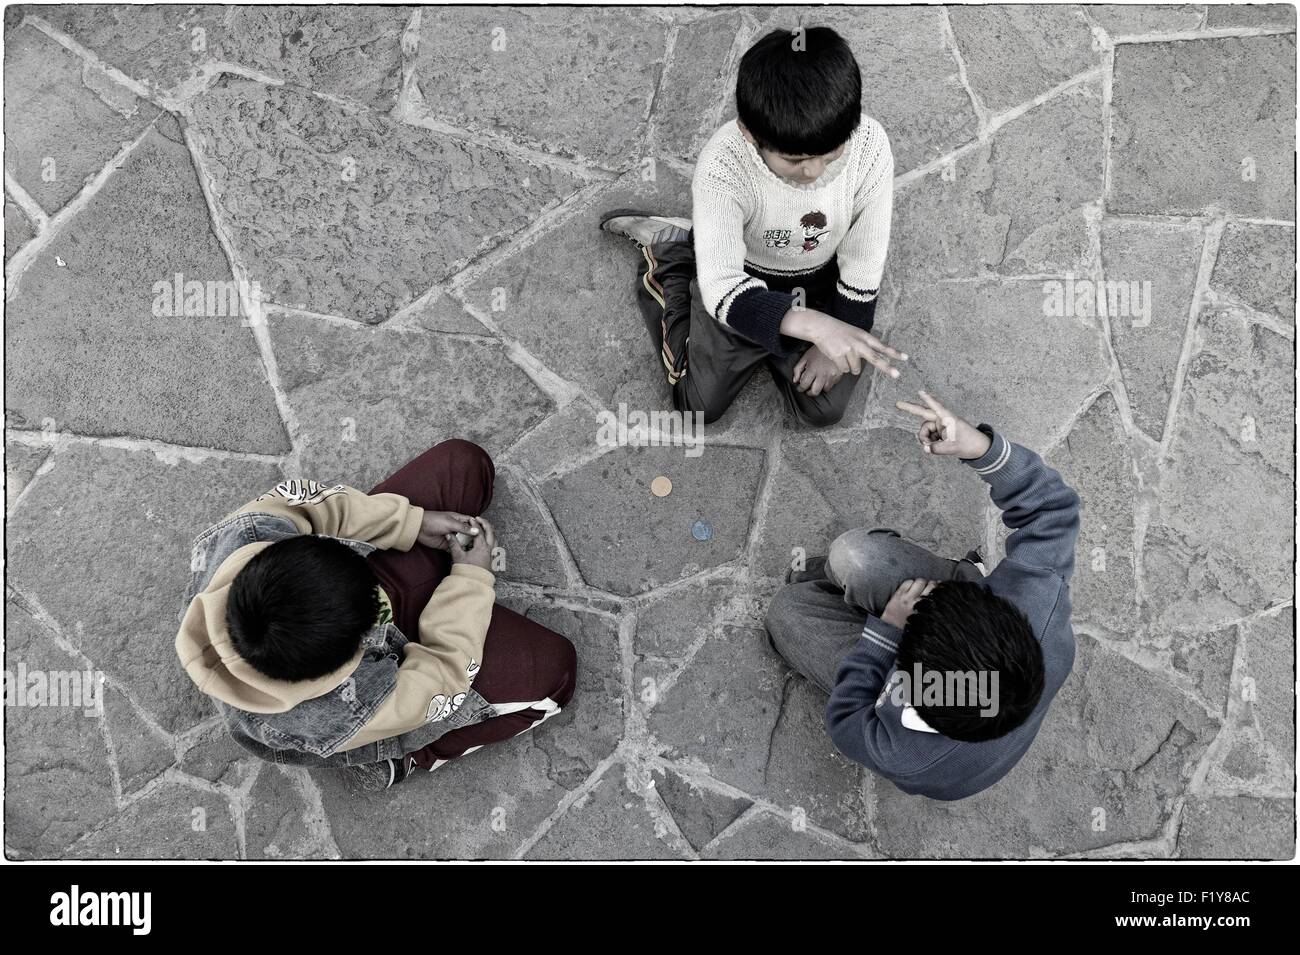 Peru, Cuzco Province, Cuzco, three boys playing in of the 5 educational centres managed by the Ninos Unidos Peruanos Charitable Foundation which is in charge of 600 street children and provides education, care and food Stock Photo